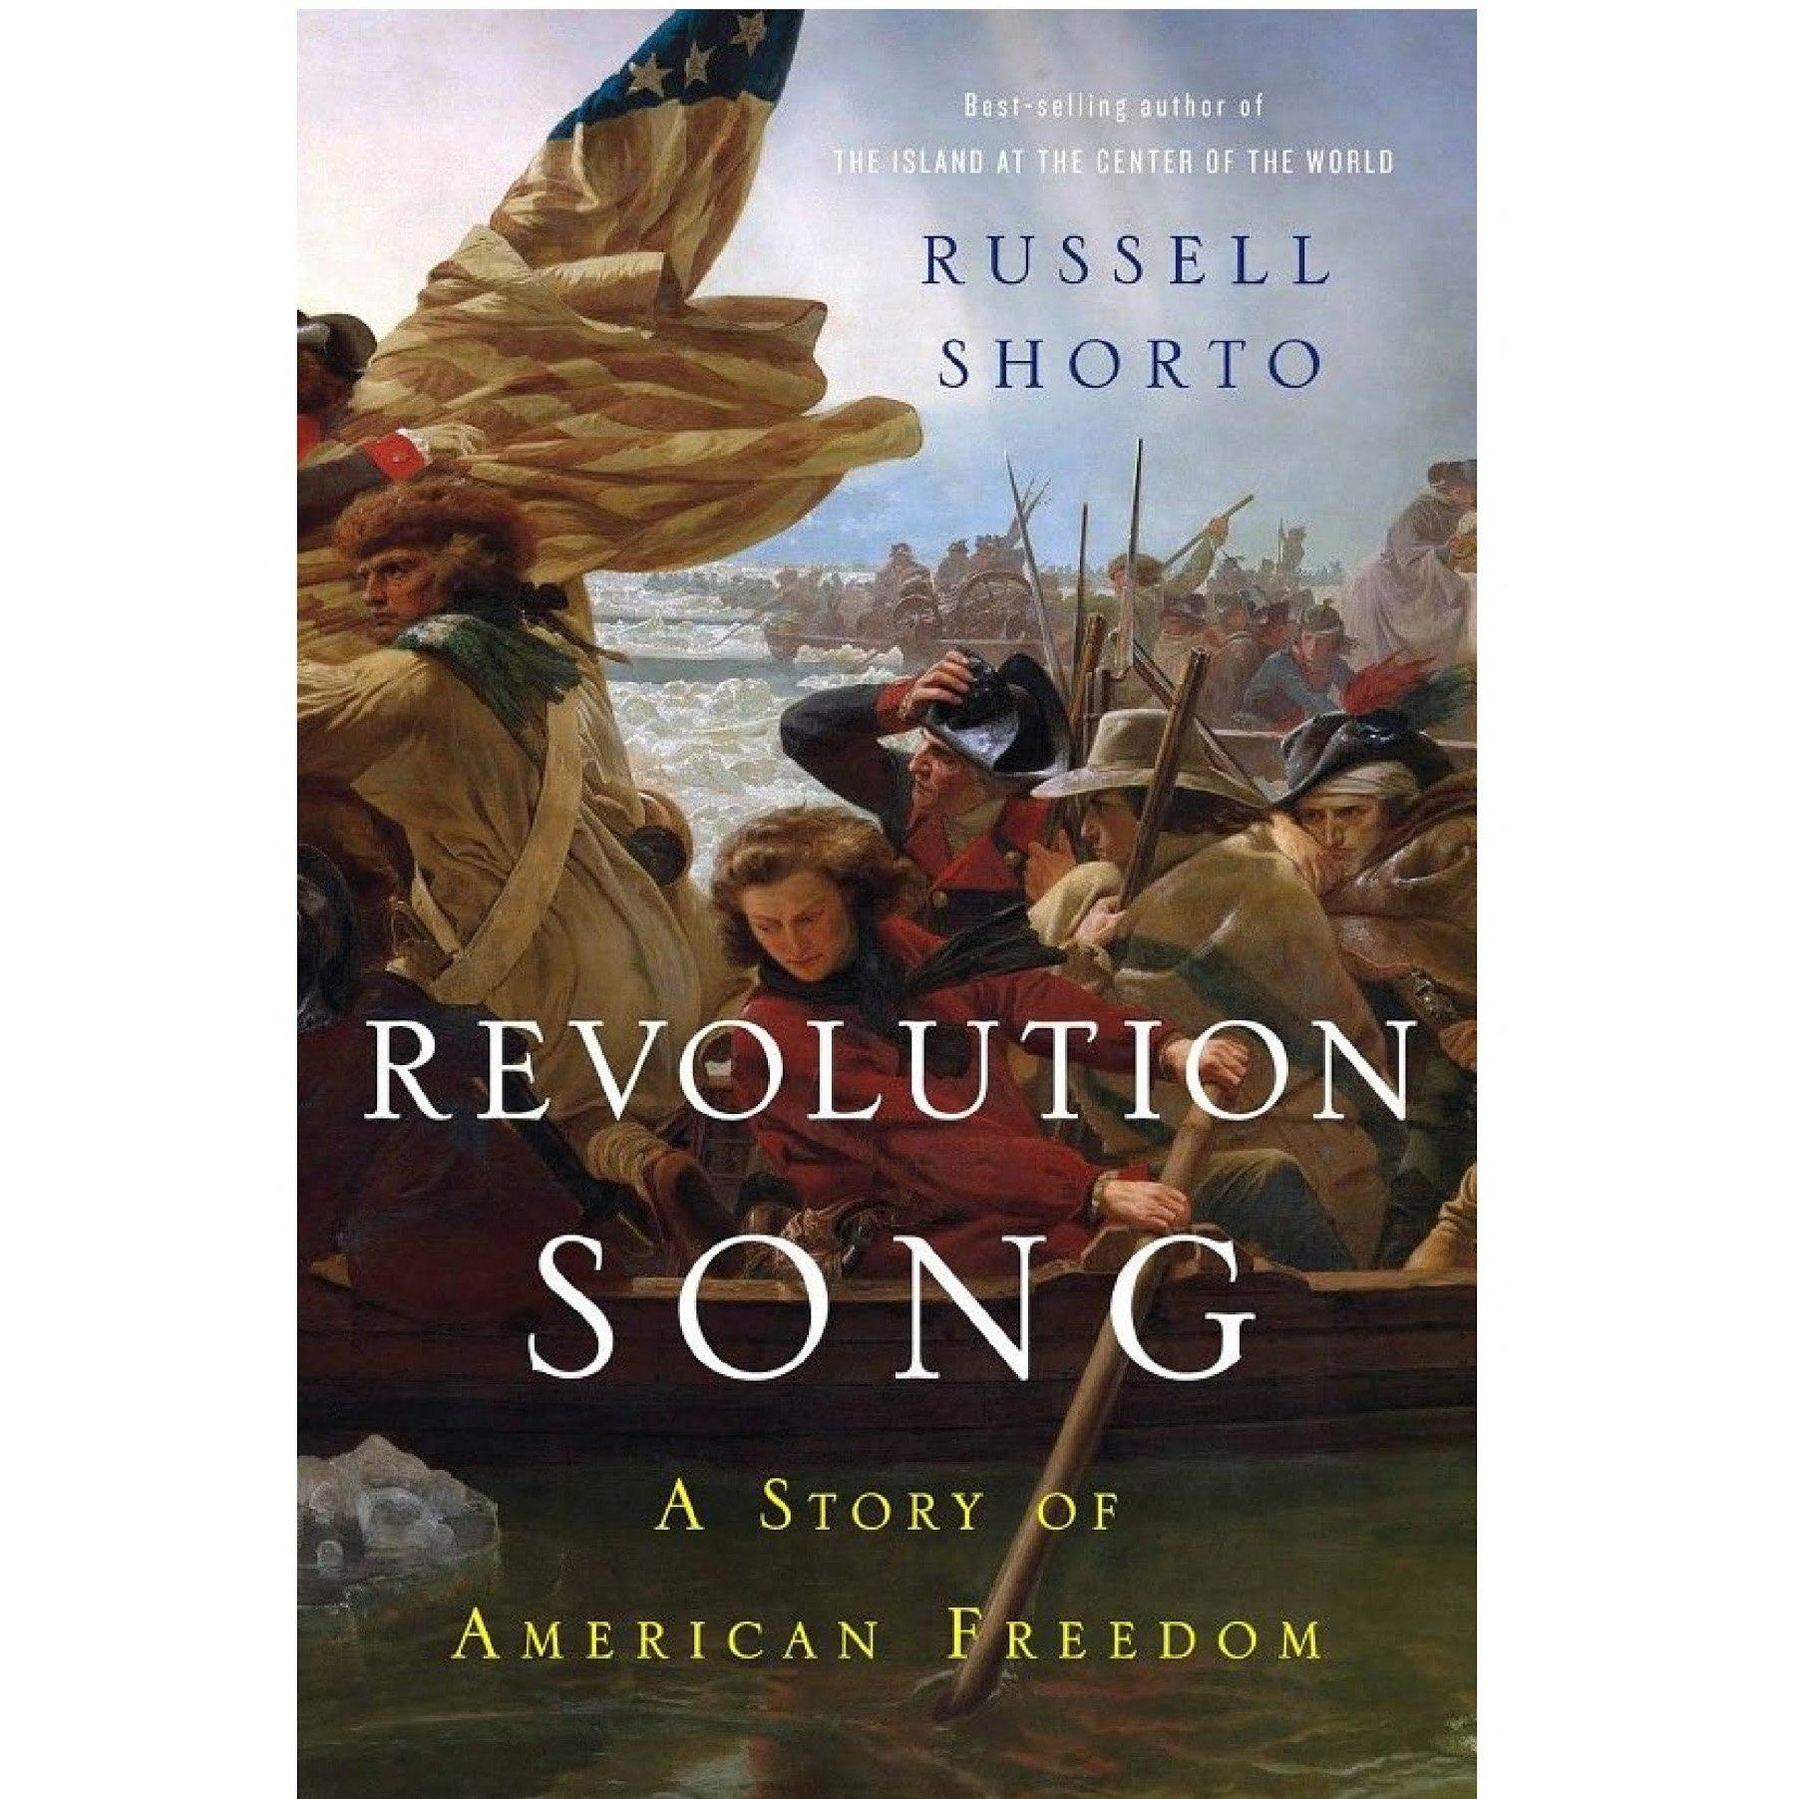 Image for "Revolution Song"